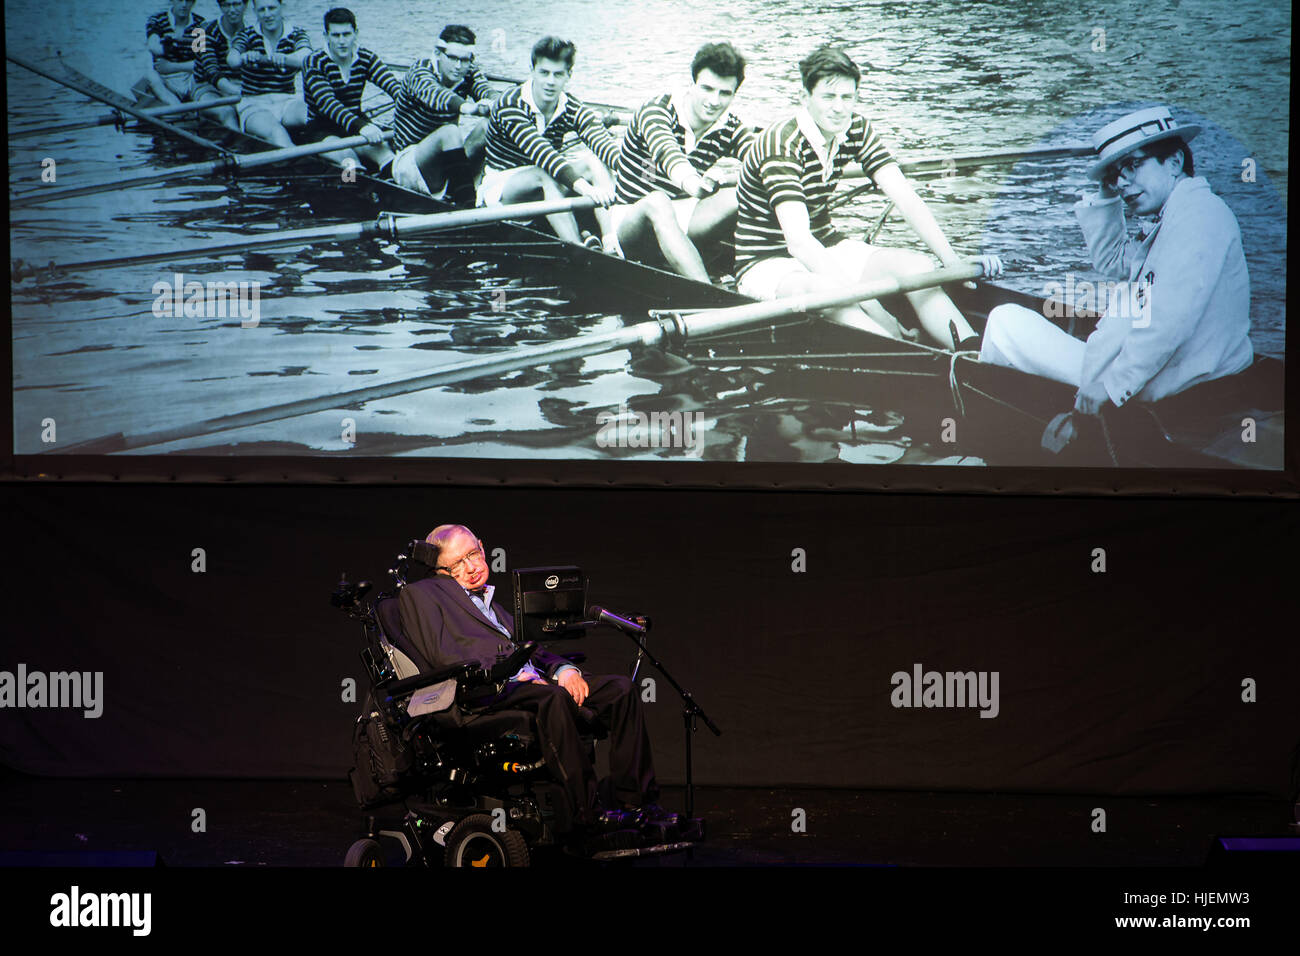 Stephen Hawking, British scientist, world renowned physicistportrait with college pictures from his young age in the background, Starmus festival Stock Photo